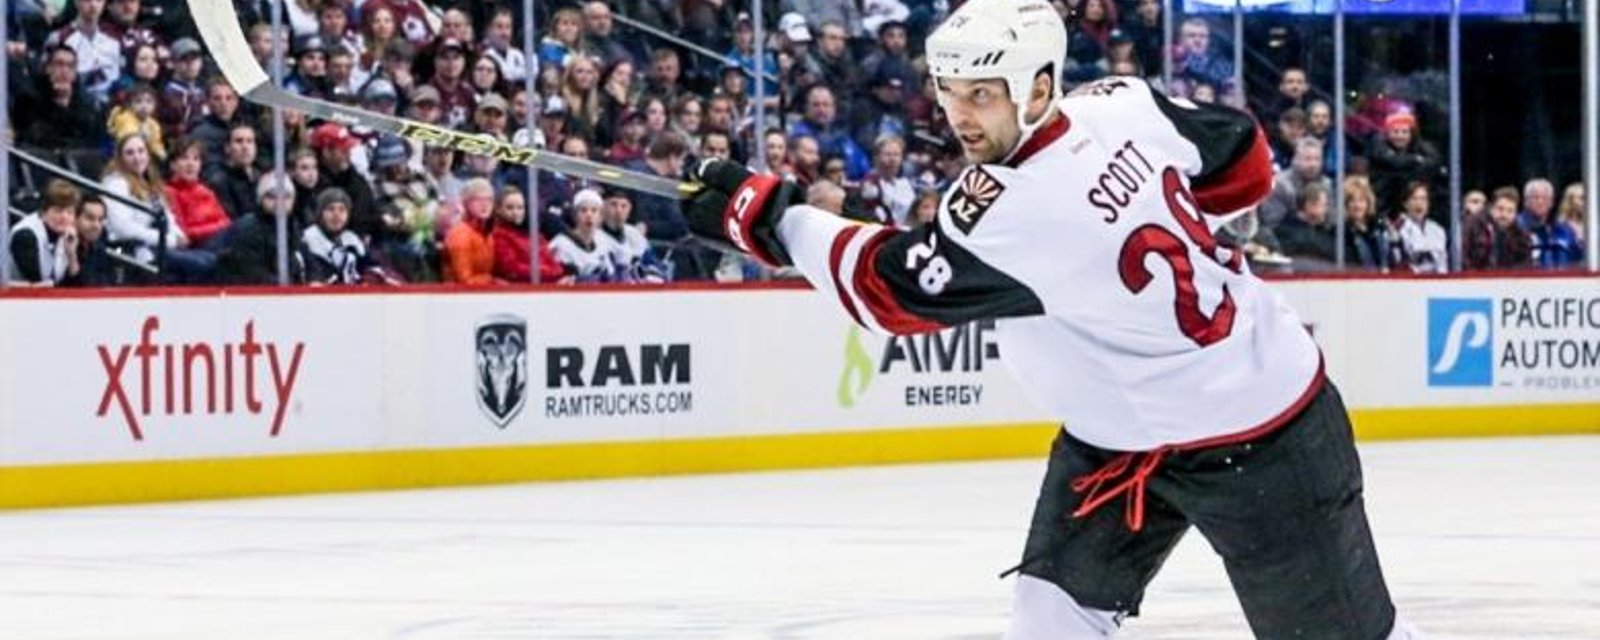 Did the National Hockey League orchestrate a trade to screw John Scott?